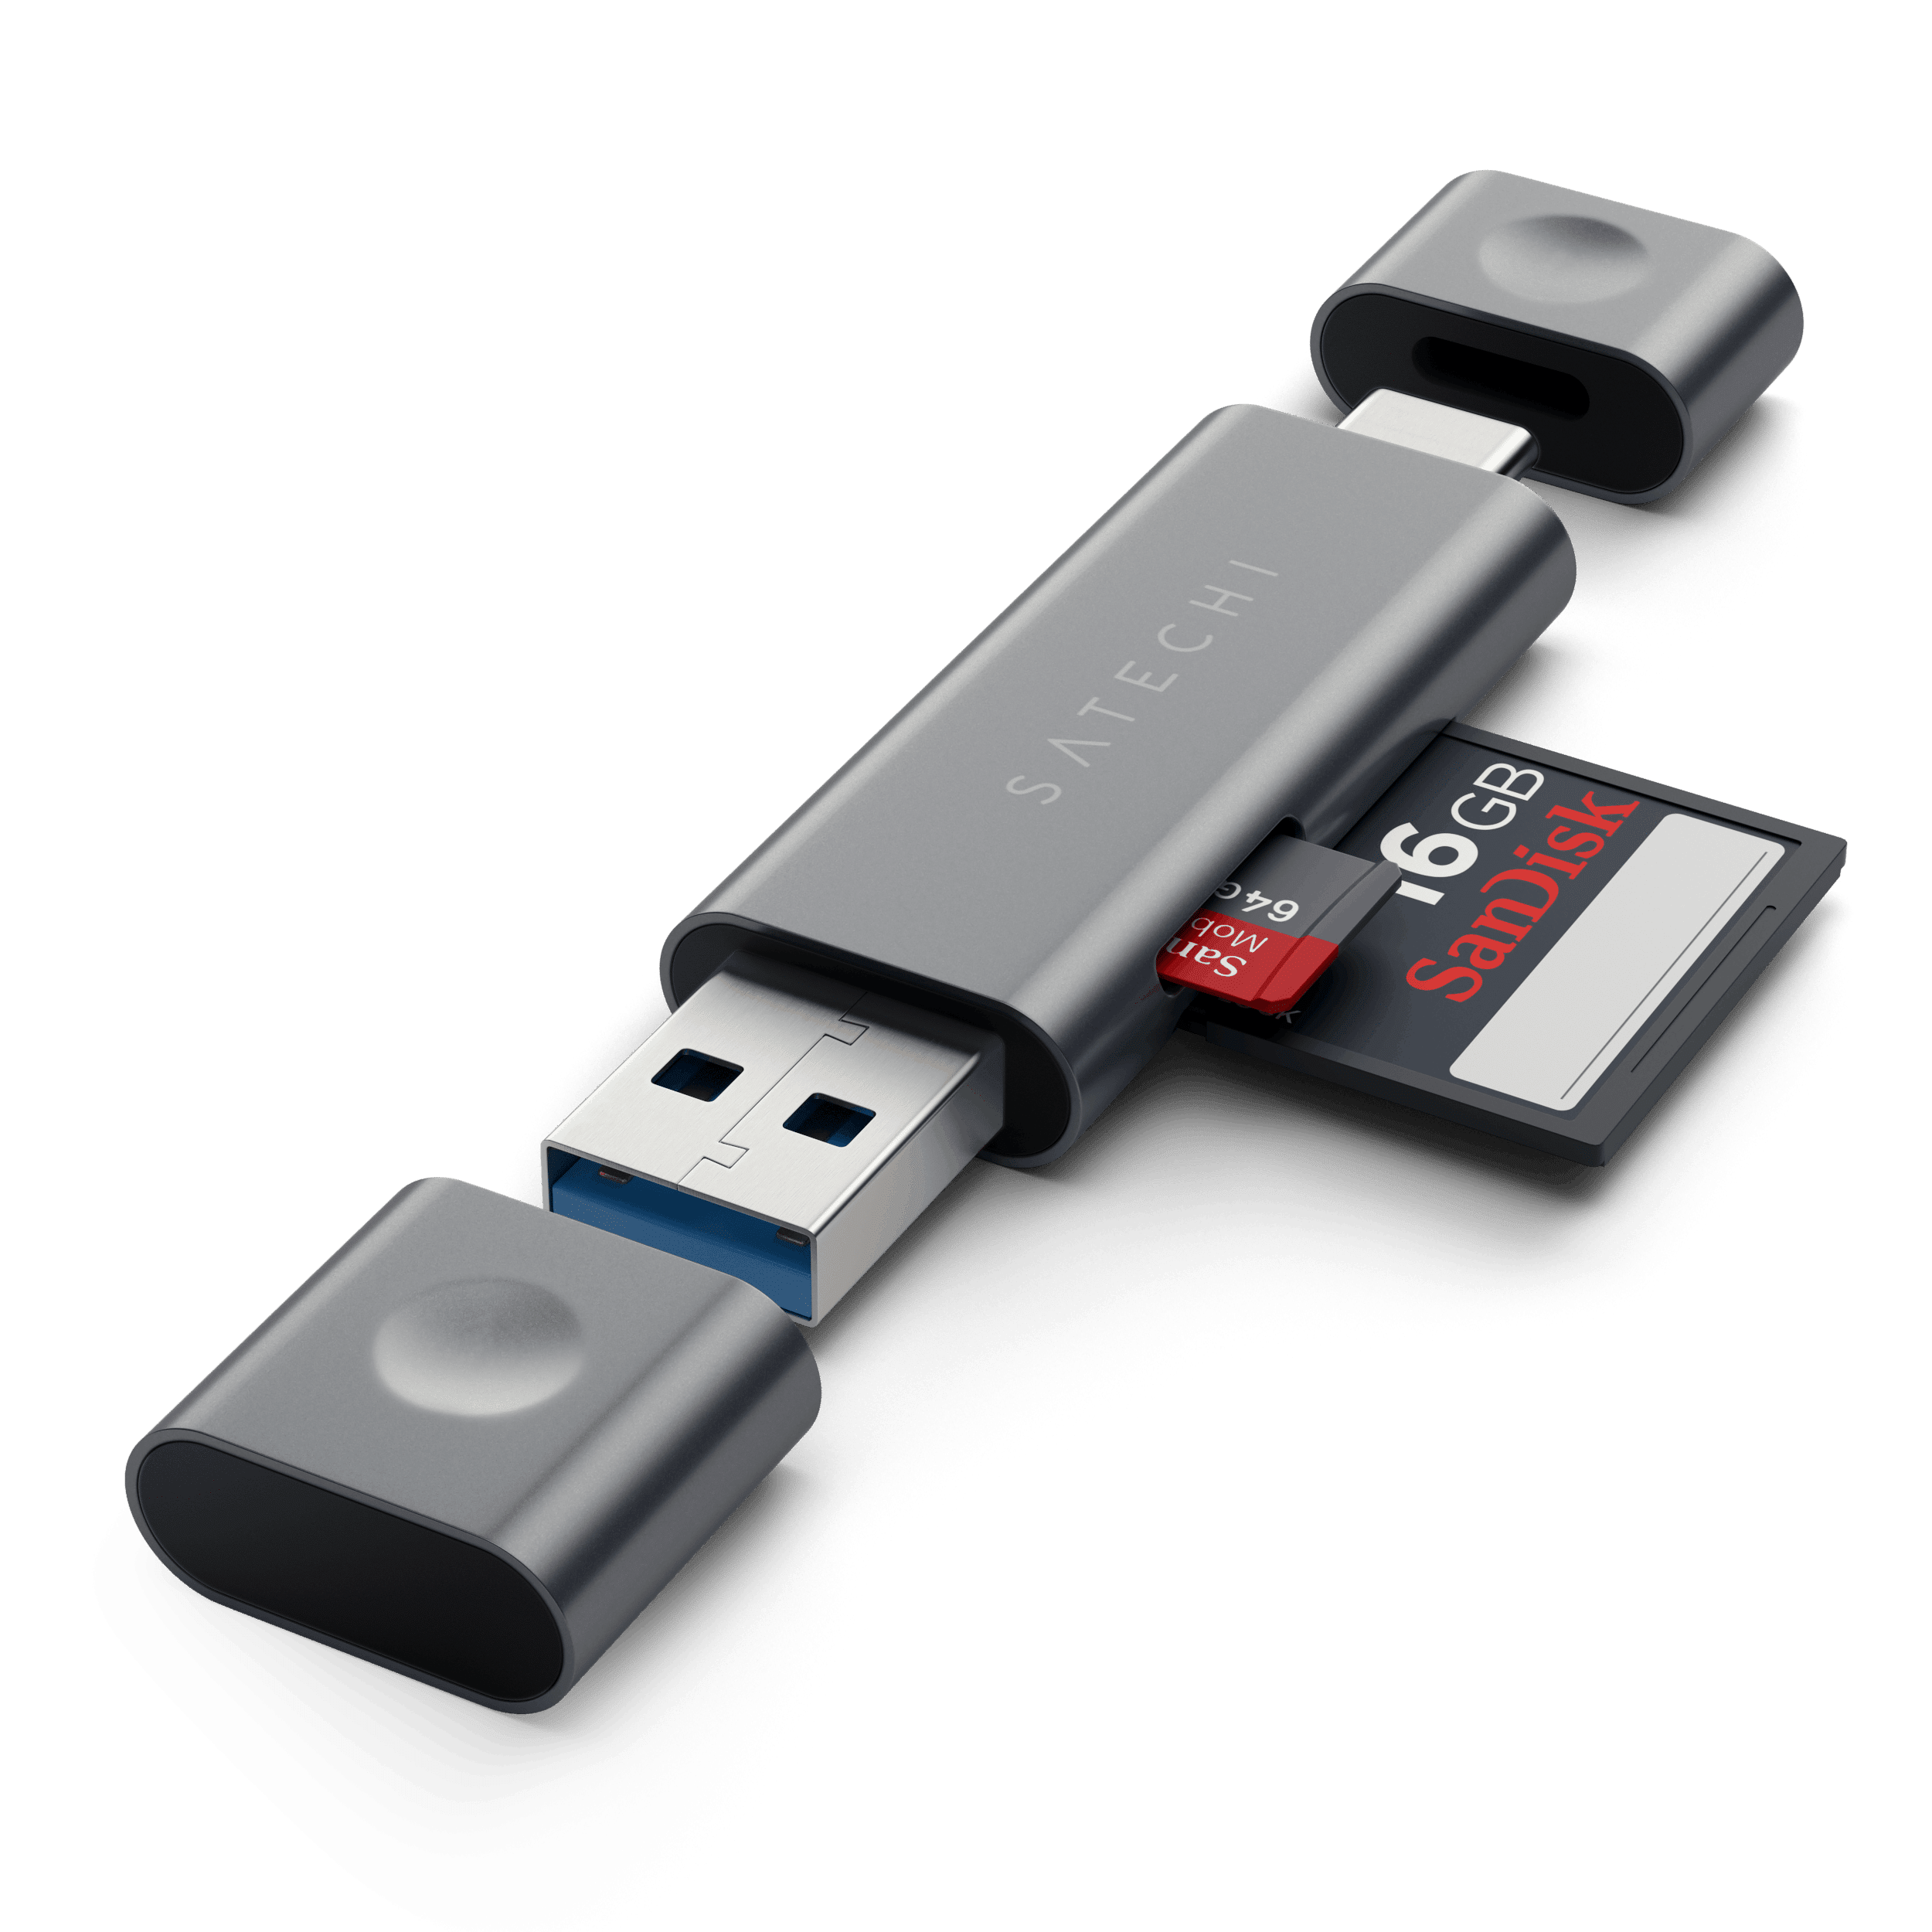 Aluminum Type-C USB 3.0 and Micro/SD Card Reader for Type-C Devices Hubs Satechi Space Gray